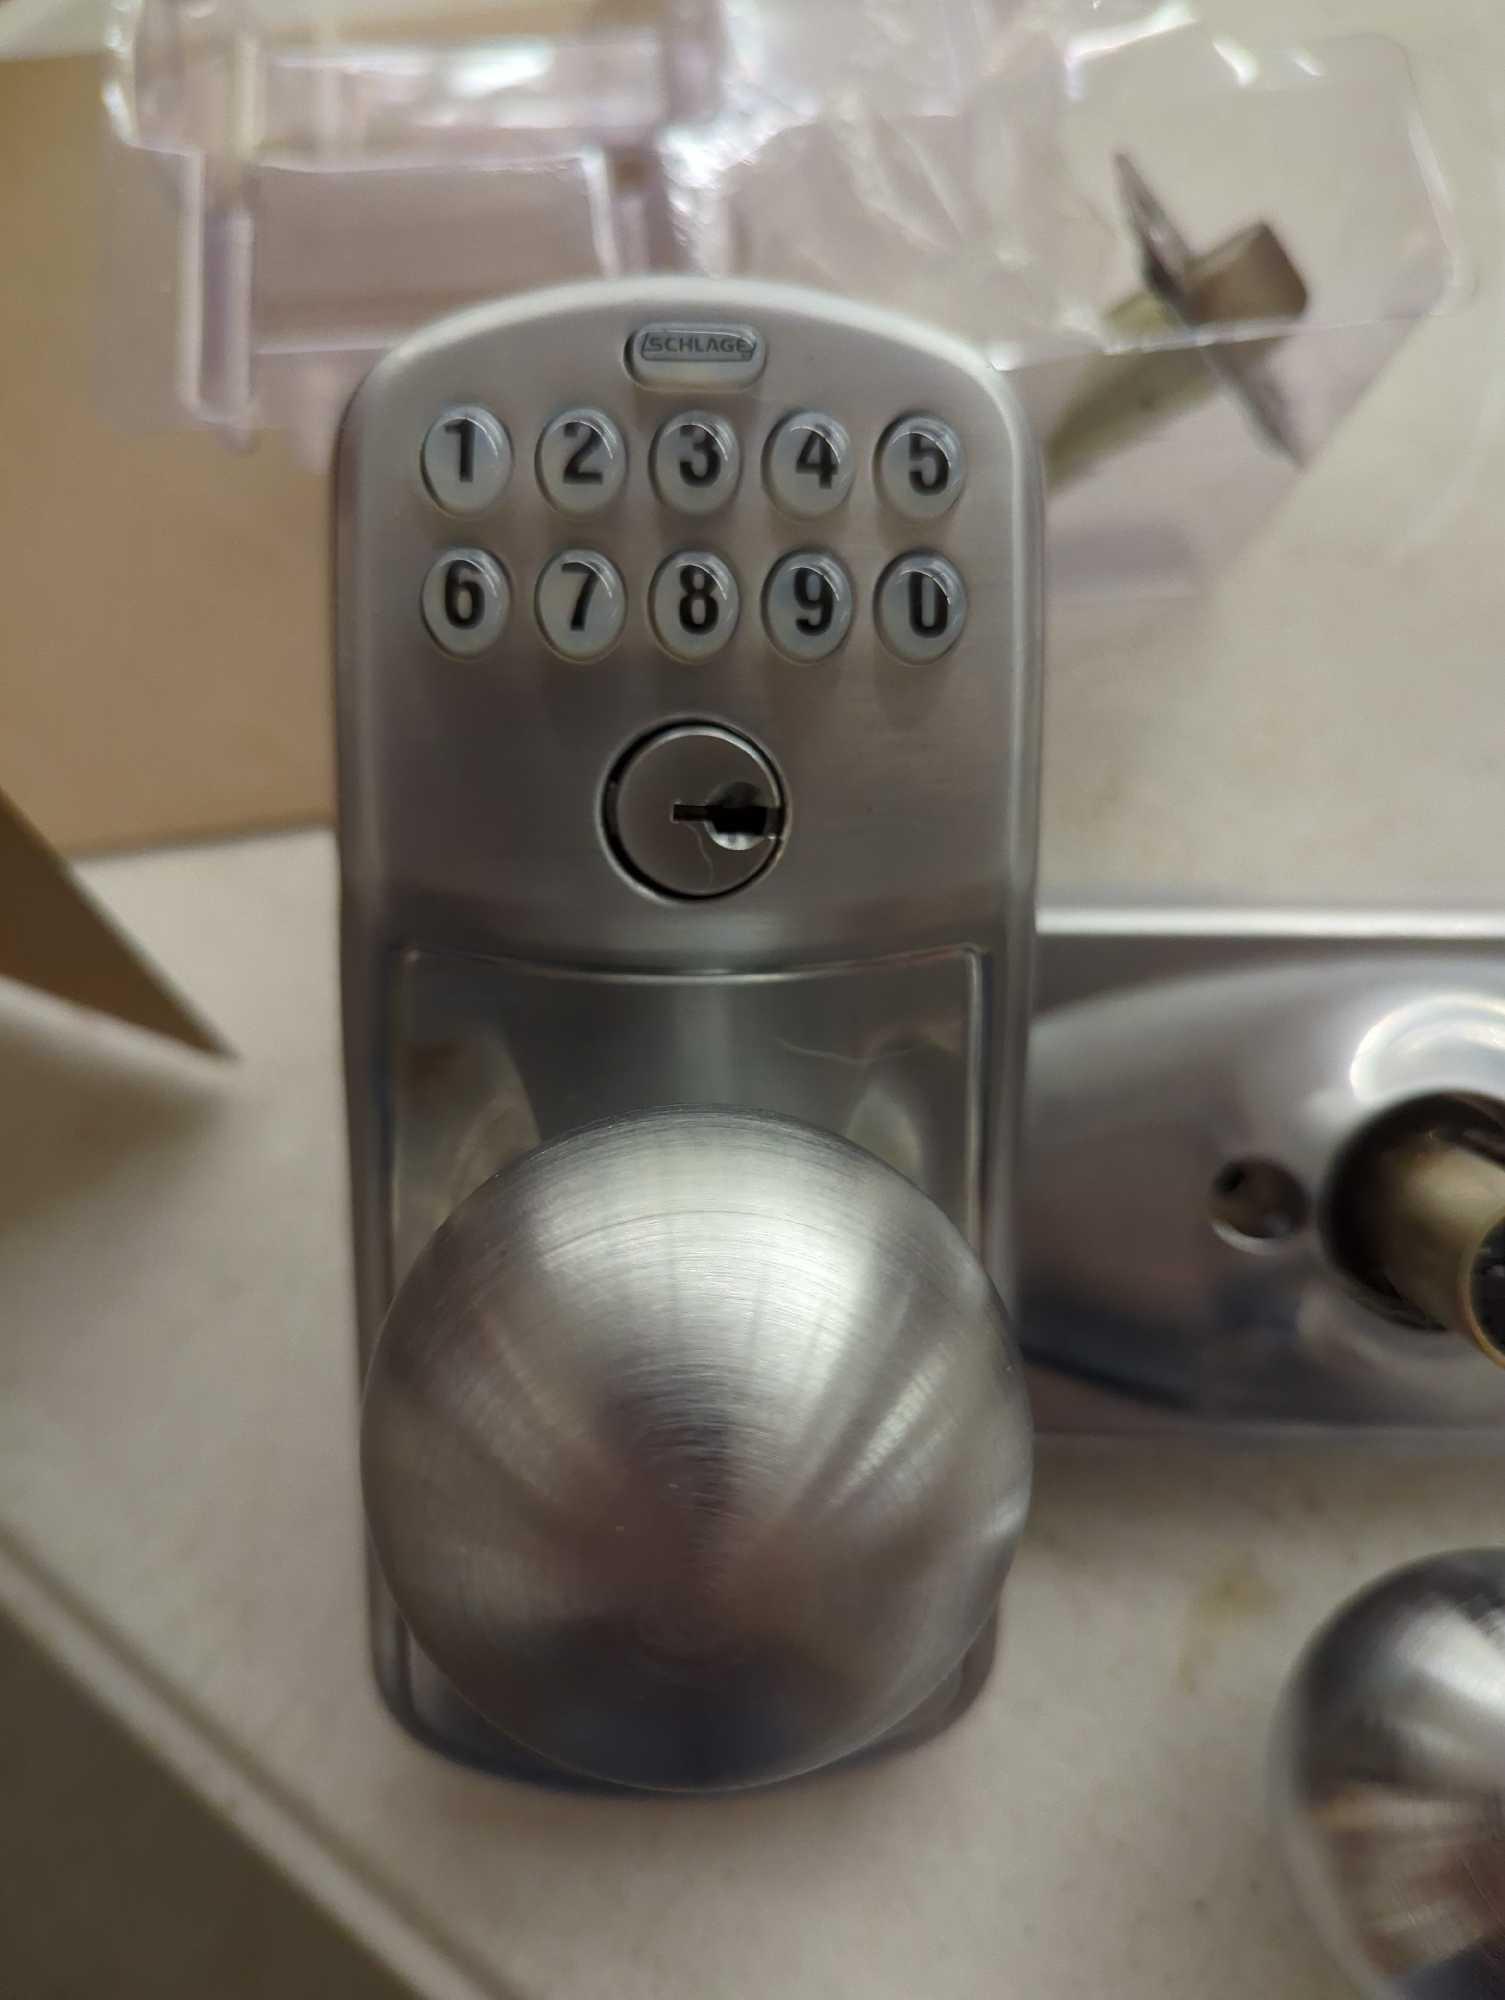 Schlage Plymouth Satin Chrome Electronic Keypad Door Lock with Orbit Knob and Flex Lock, Appears to